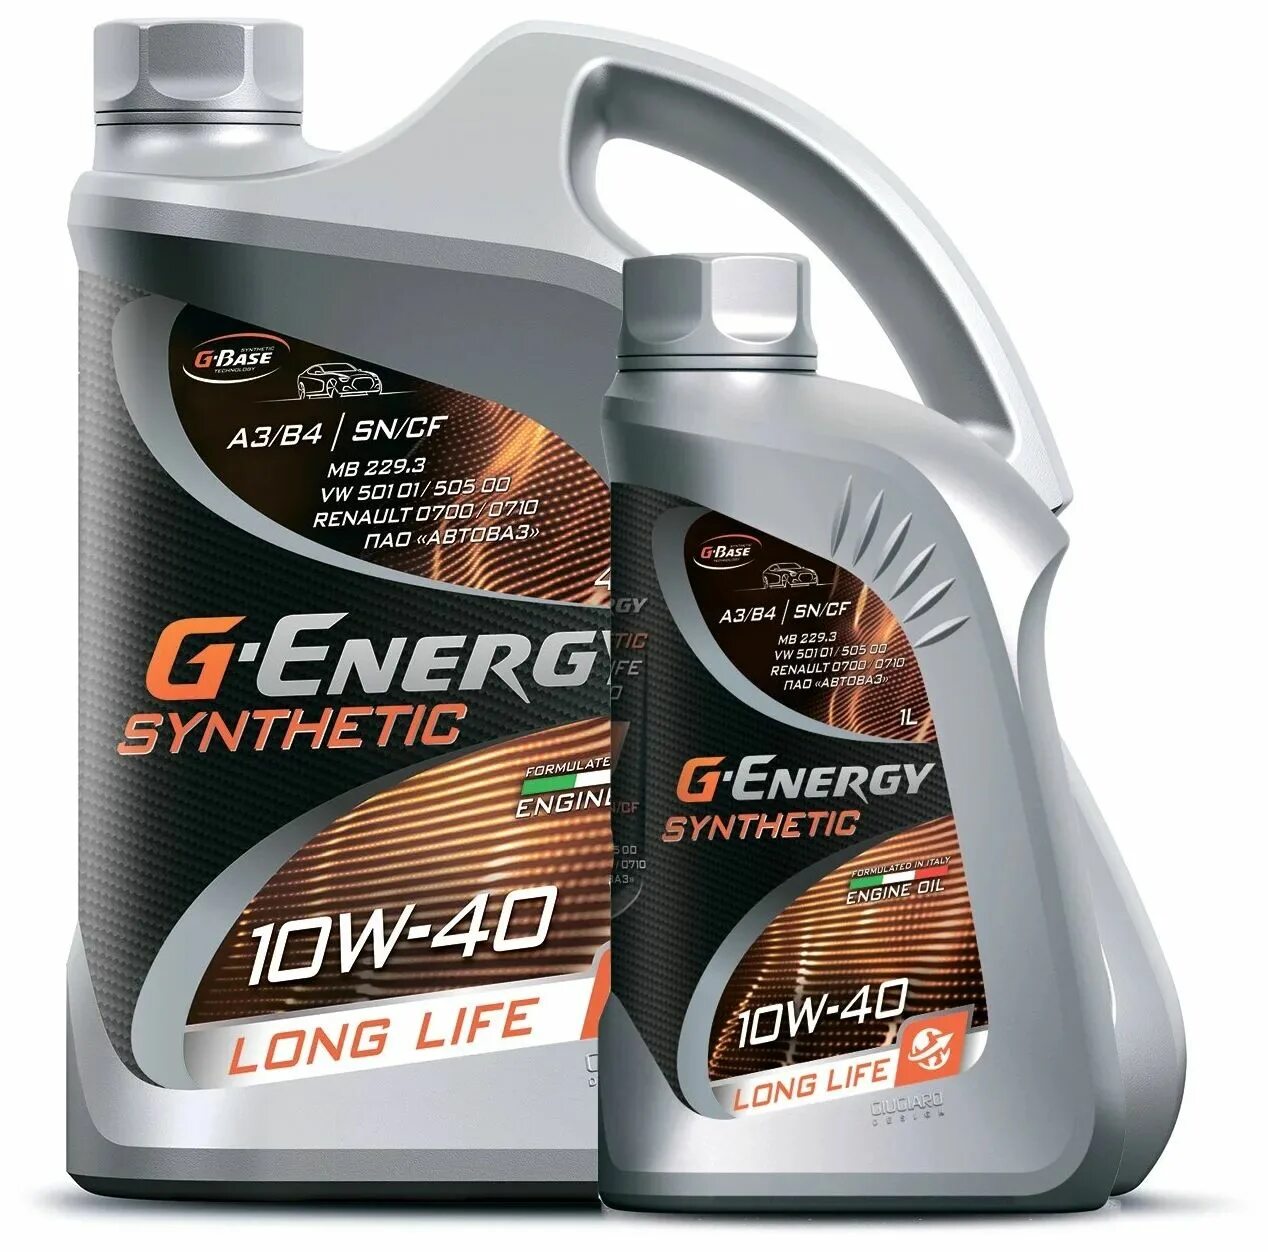 Synthetic long life 10w 40. G-Energy Synthetic far East 5w-30 4л. G-Energy 5w30 Synthetic. G-Energy Synthetic Active 5w-30. G Energy 5w30 синтетика Active 1 л.